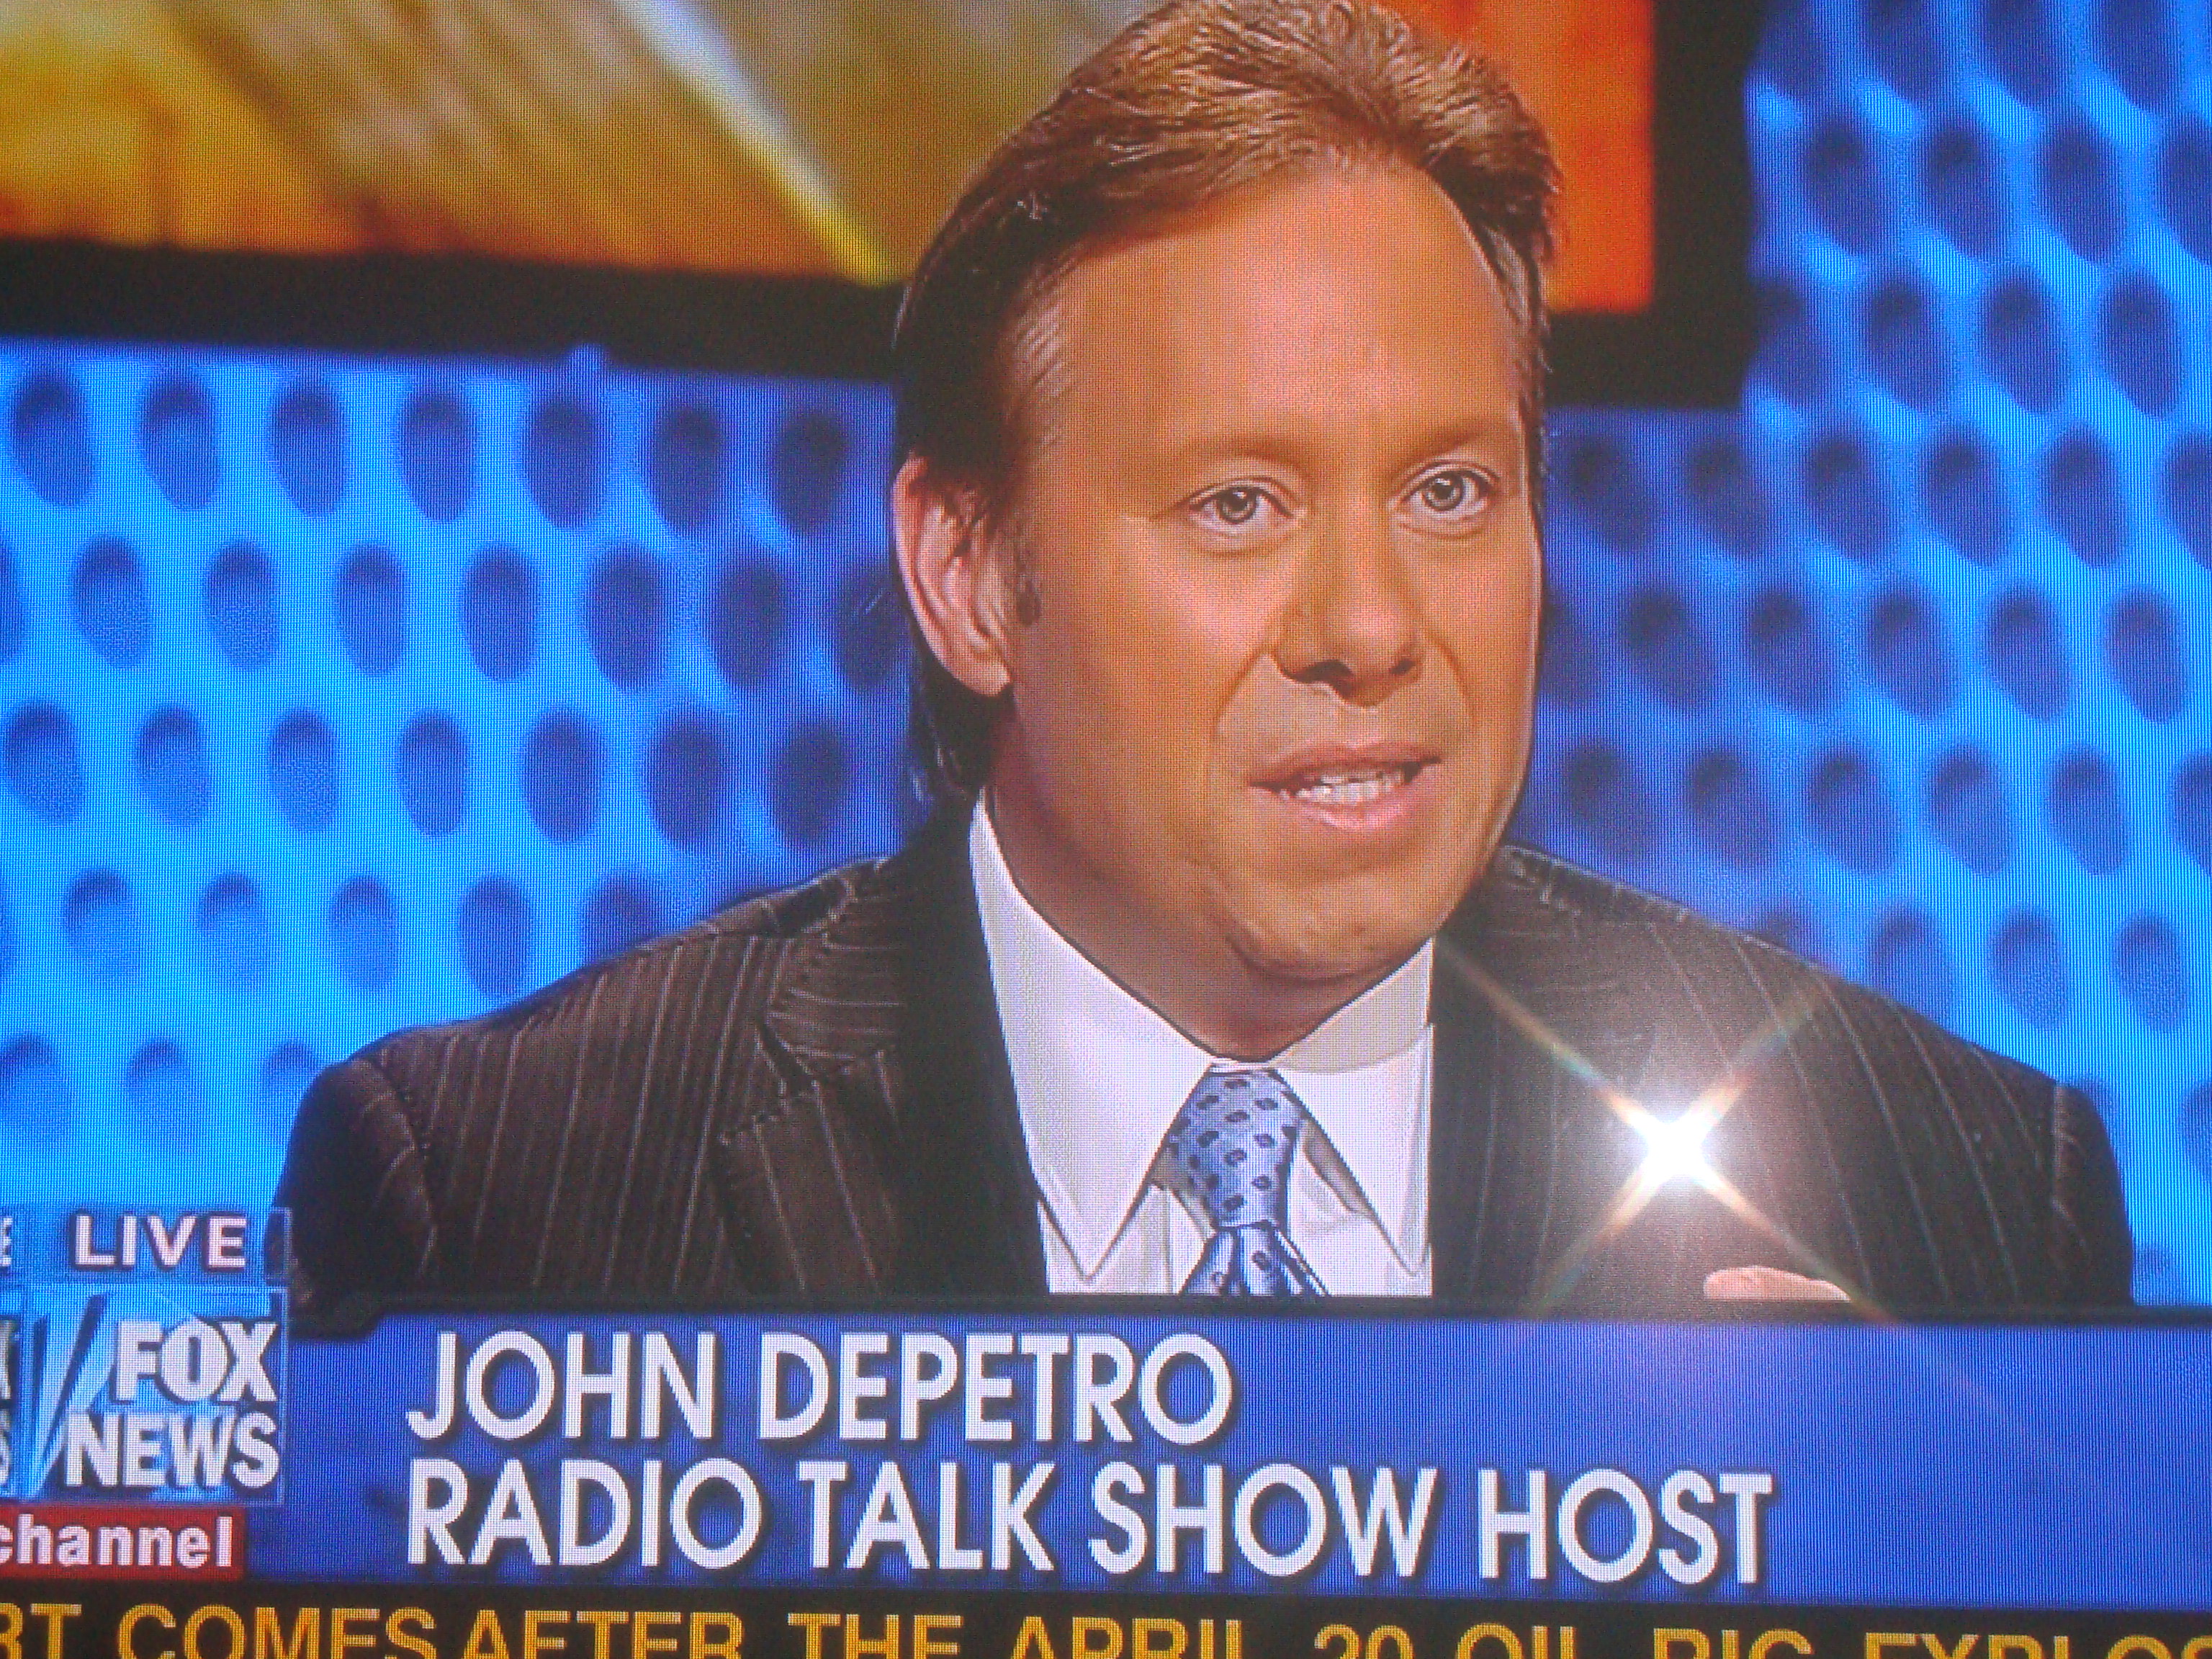 WPRO radio host John DePetro apologizes for comments about women